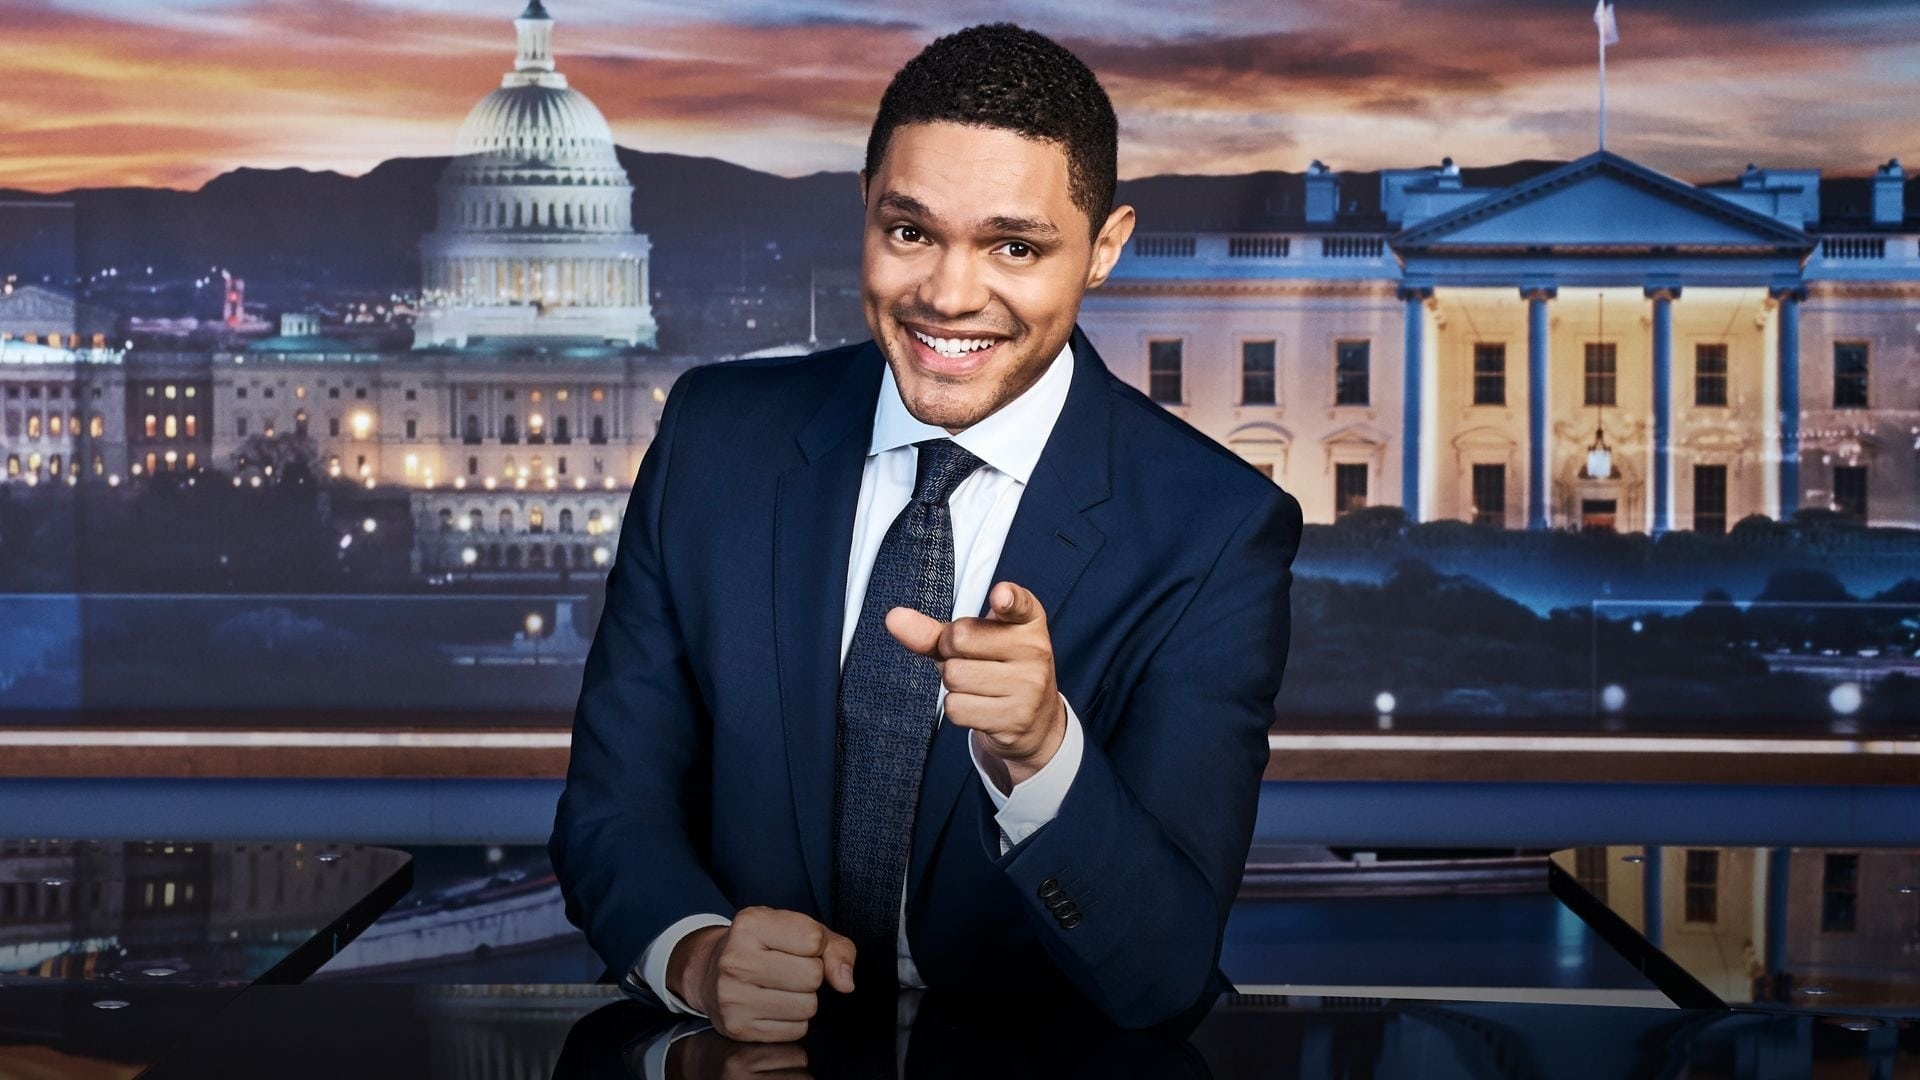 Daily Show with Trevor Noah, TV series, Backdrops, The Movie Database, 1920x1080 Full HD Desktop